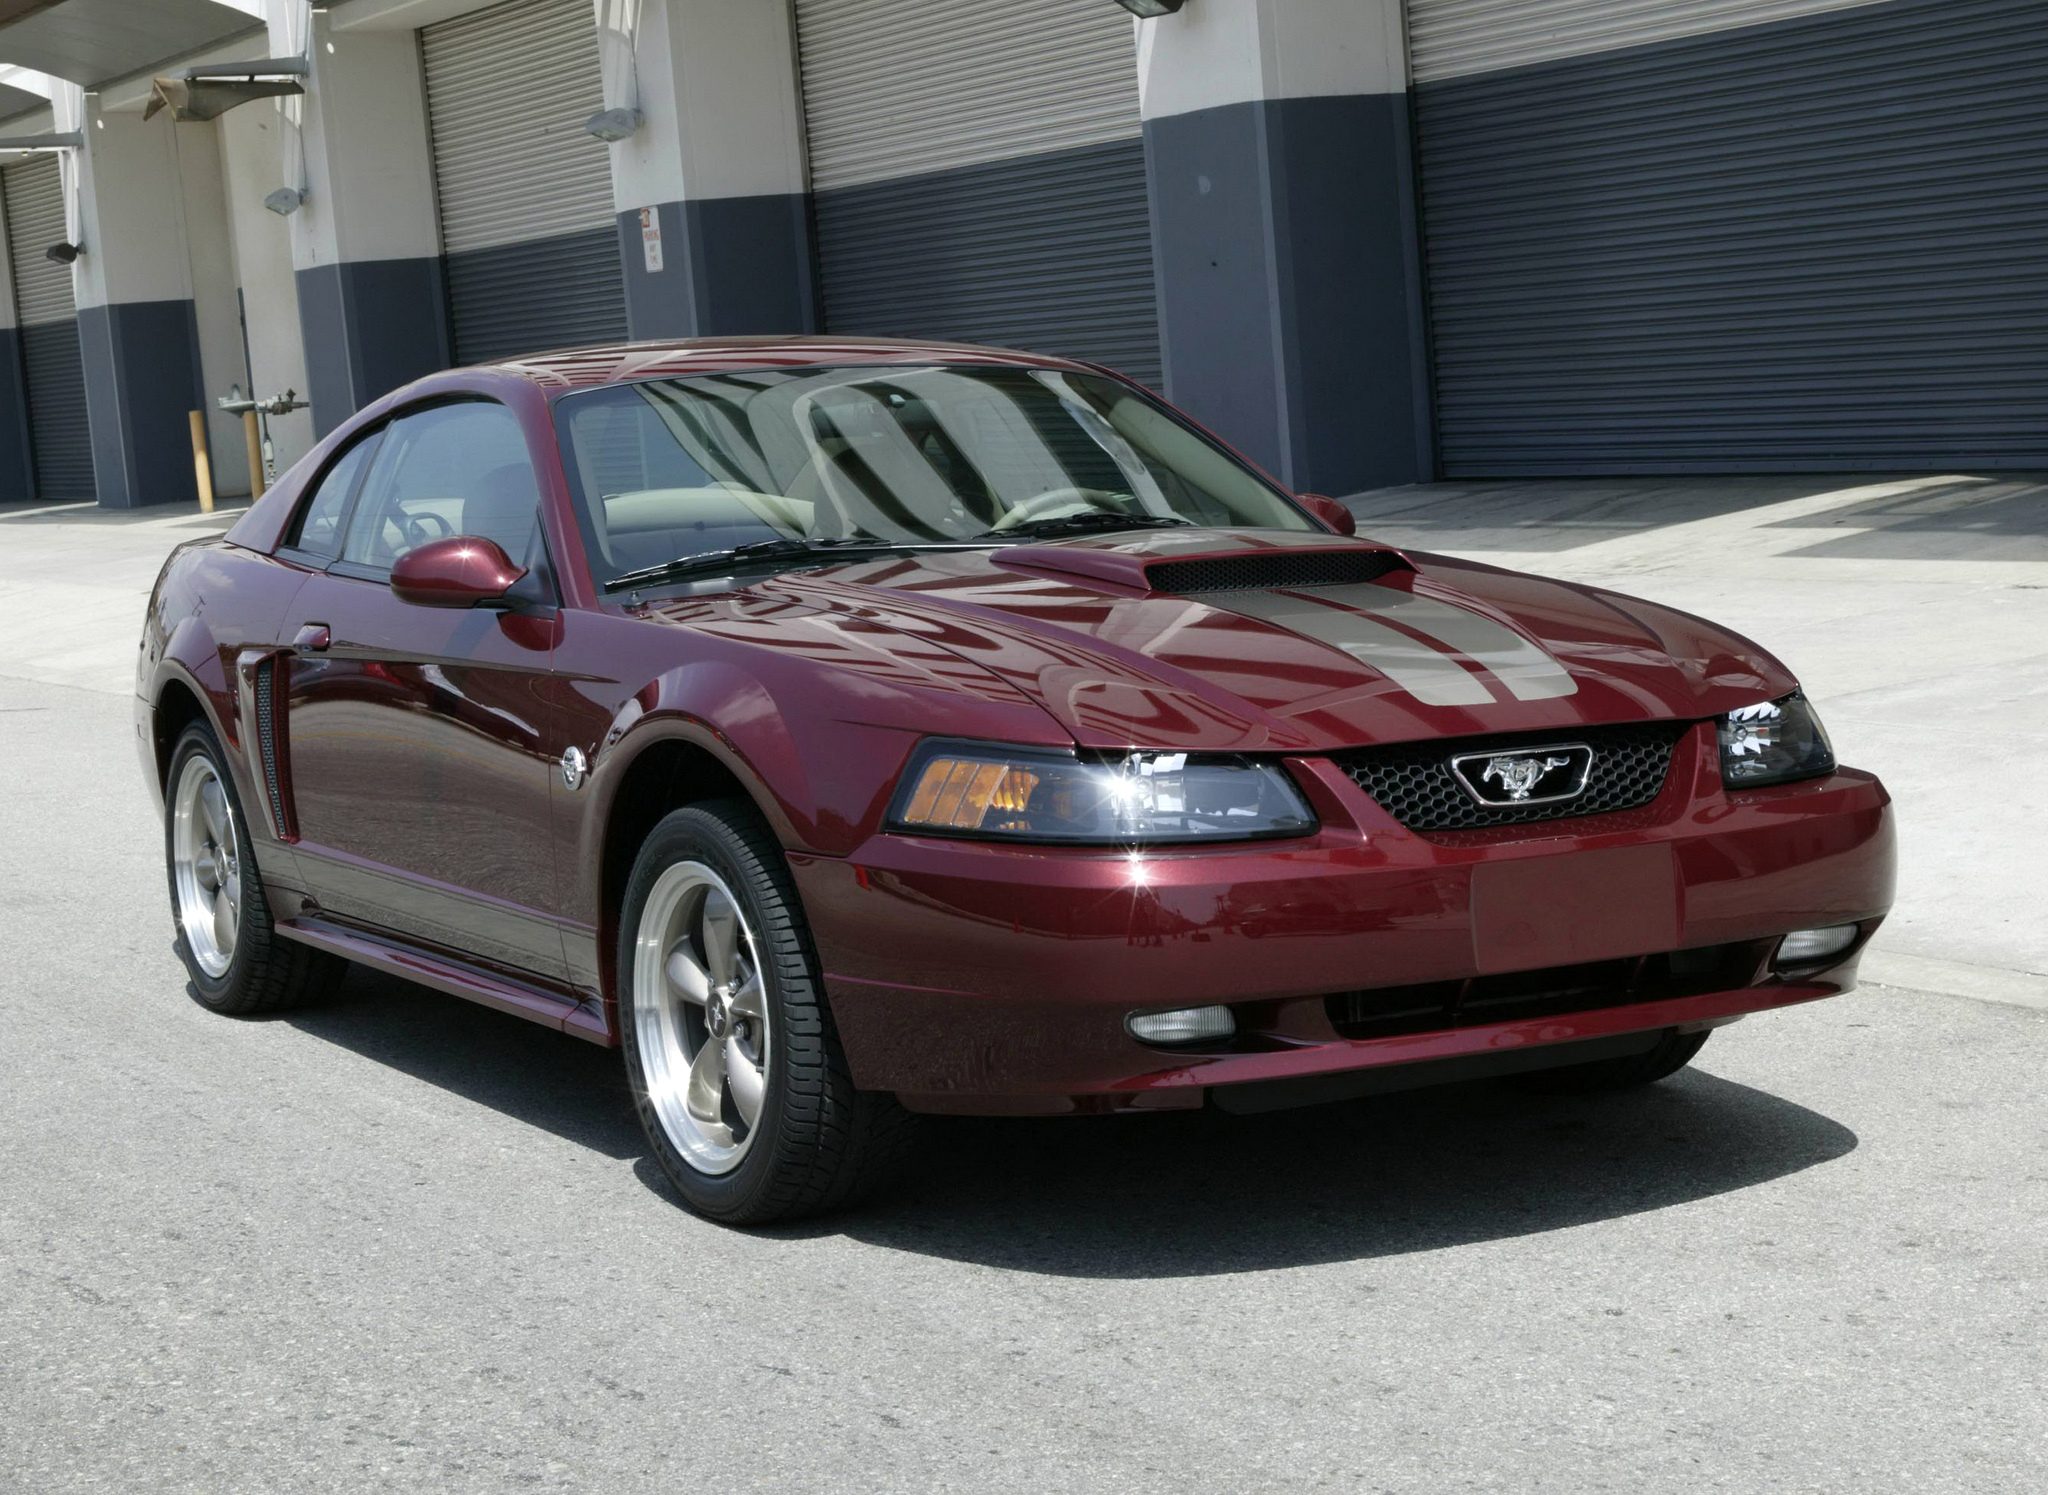 Mustang Of The Day: 2004 Ford Mustang 40th Anniversary Trim Package